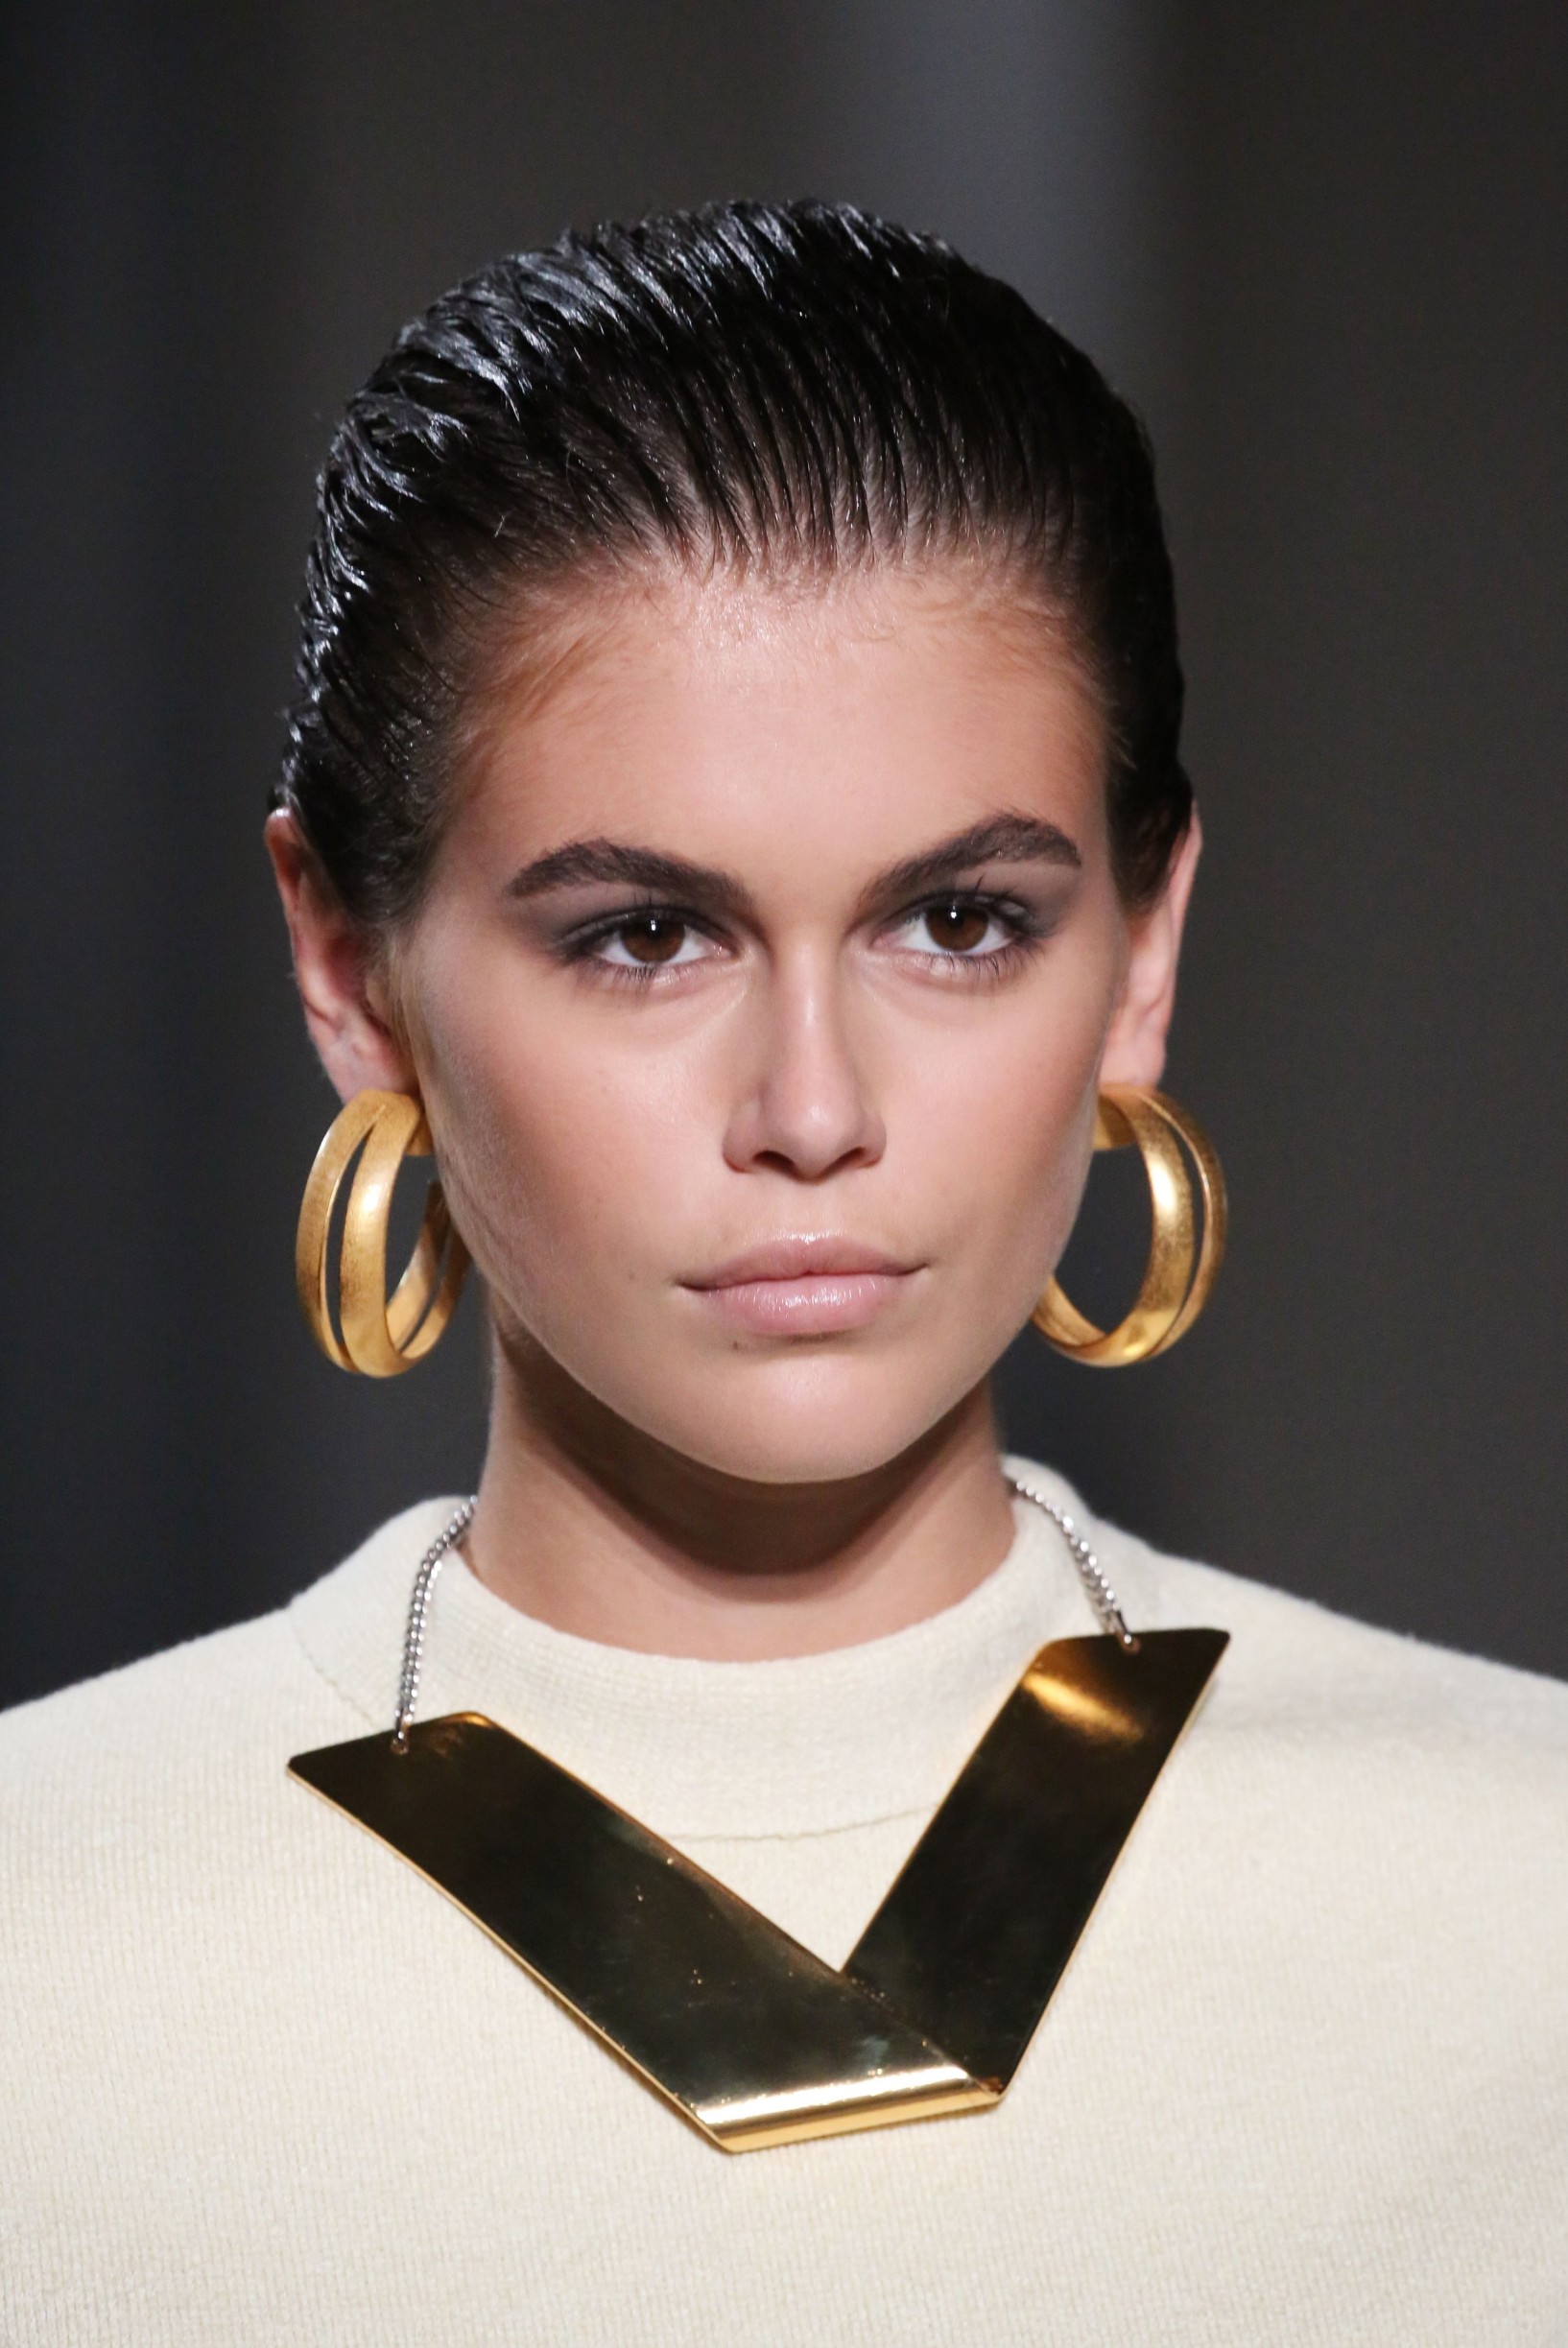 Kaia Gerber
Proenza Schouler show, Runway, Spring Summer 2020, New York Fashion Week, USA - 10 Sep 2019, Image: 470221340, License: Rights-managed, Restrictions: , Model Release: no, Credit line: Masato Onoda/WWD / Shutterstock Editorial / Profimedia